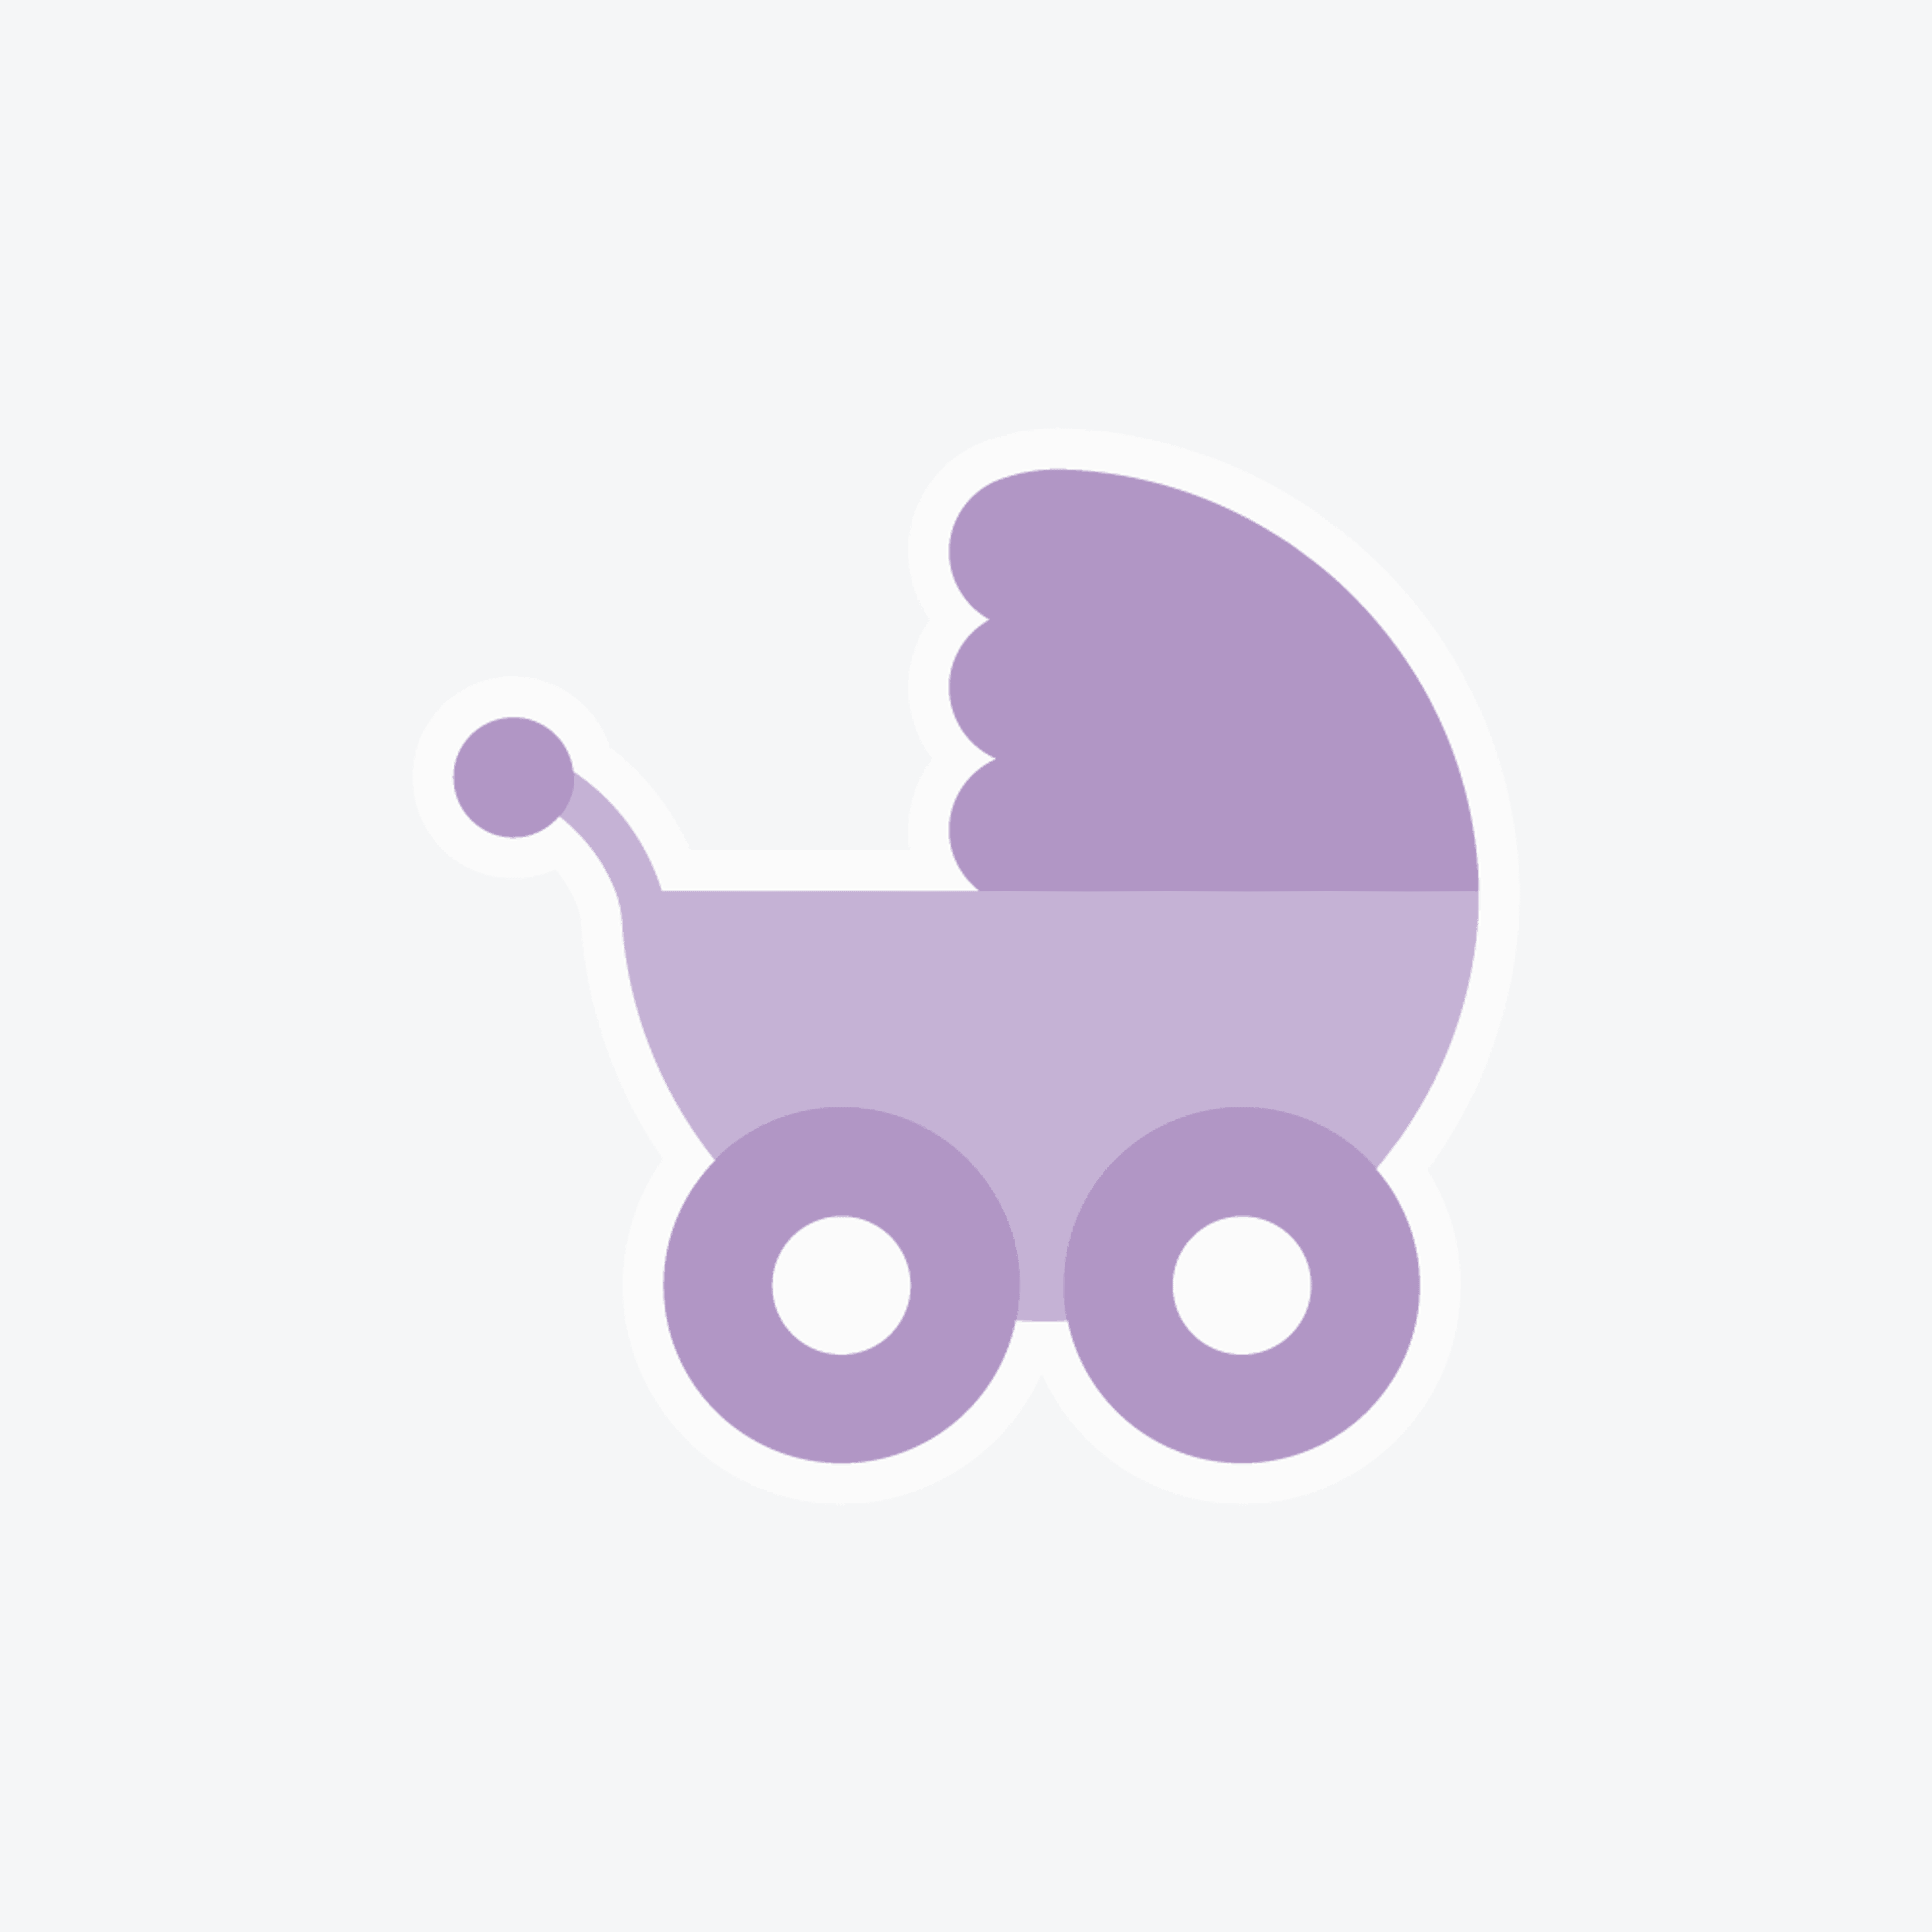 Looking for a reliable and caring nanny for our 8-month-old daughter